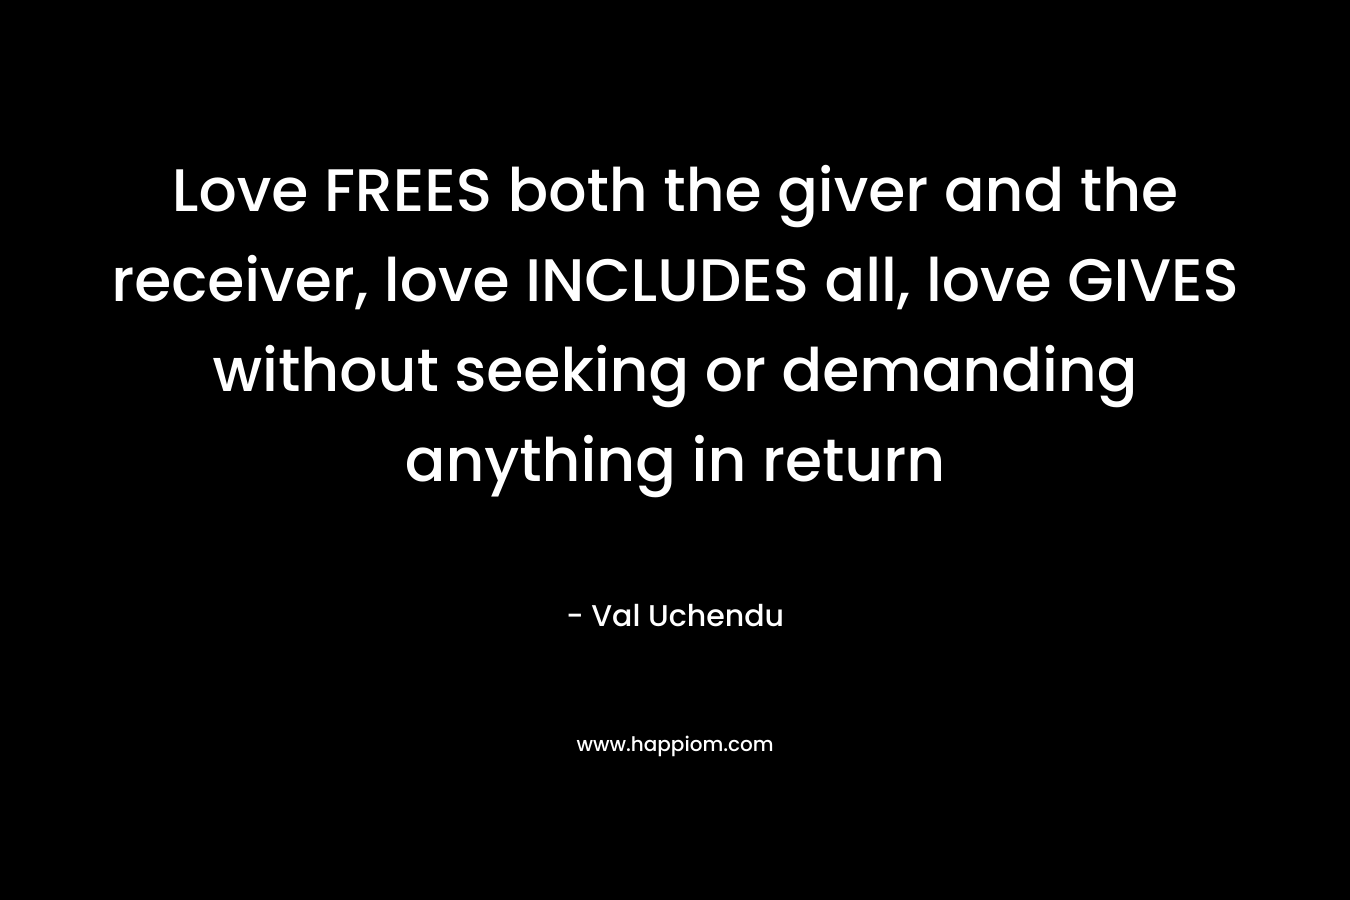 Love FREES both the giver and the receiver, love INCLUDES all, love GIVES without seeking or demanding anything in return – Val Uchendu